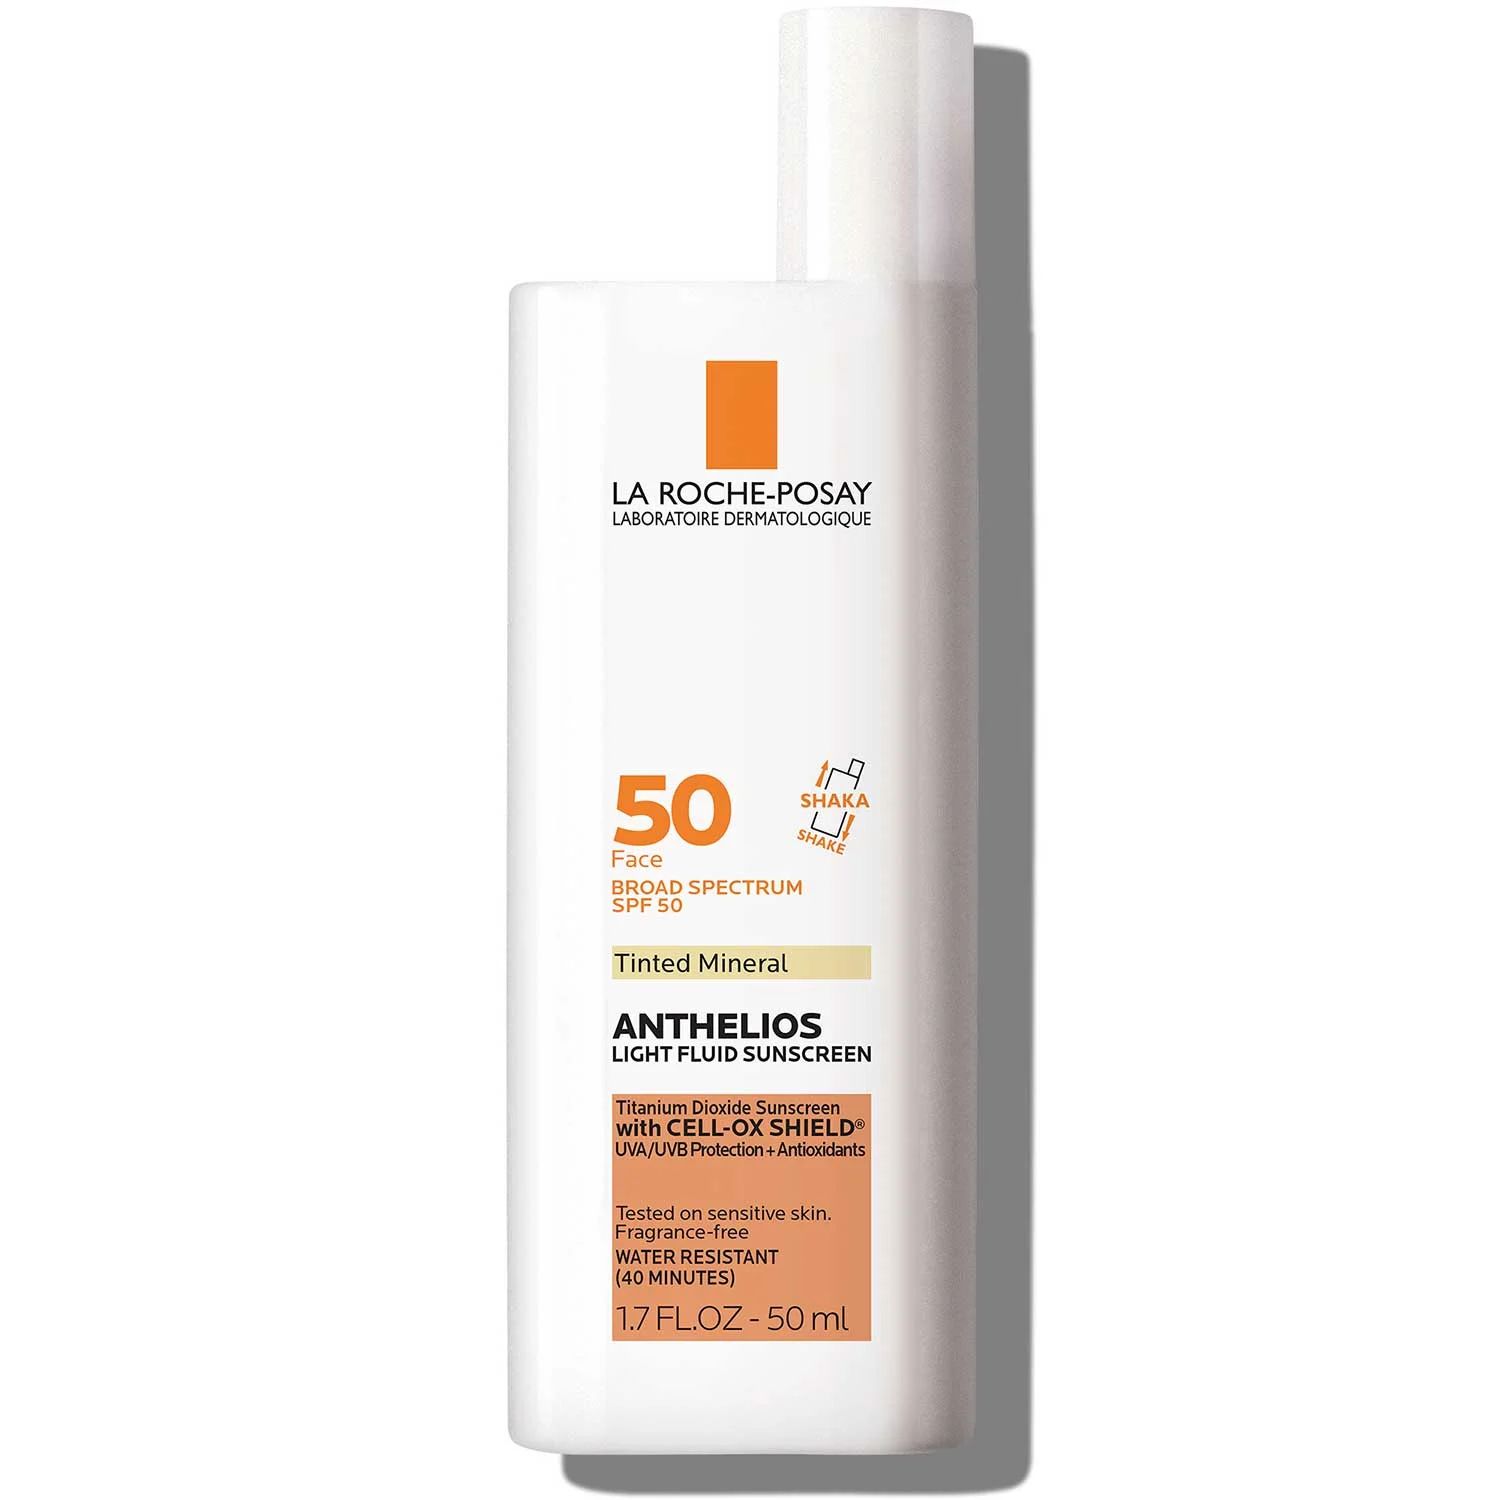 Anthelios Mineral Tinted Sunscreen for Face | La Roche-Posay | La Roche-Posay (US)